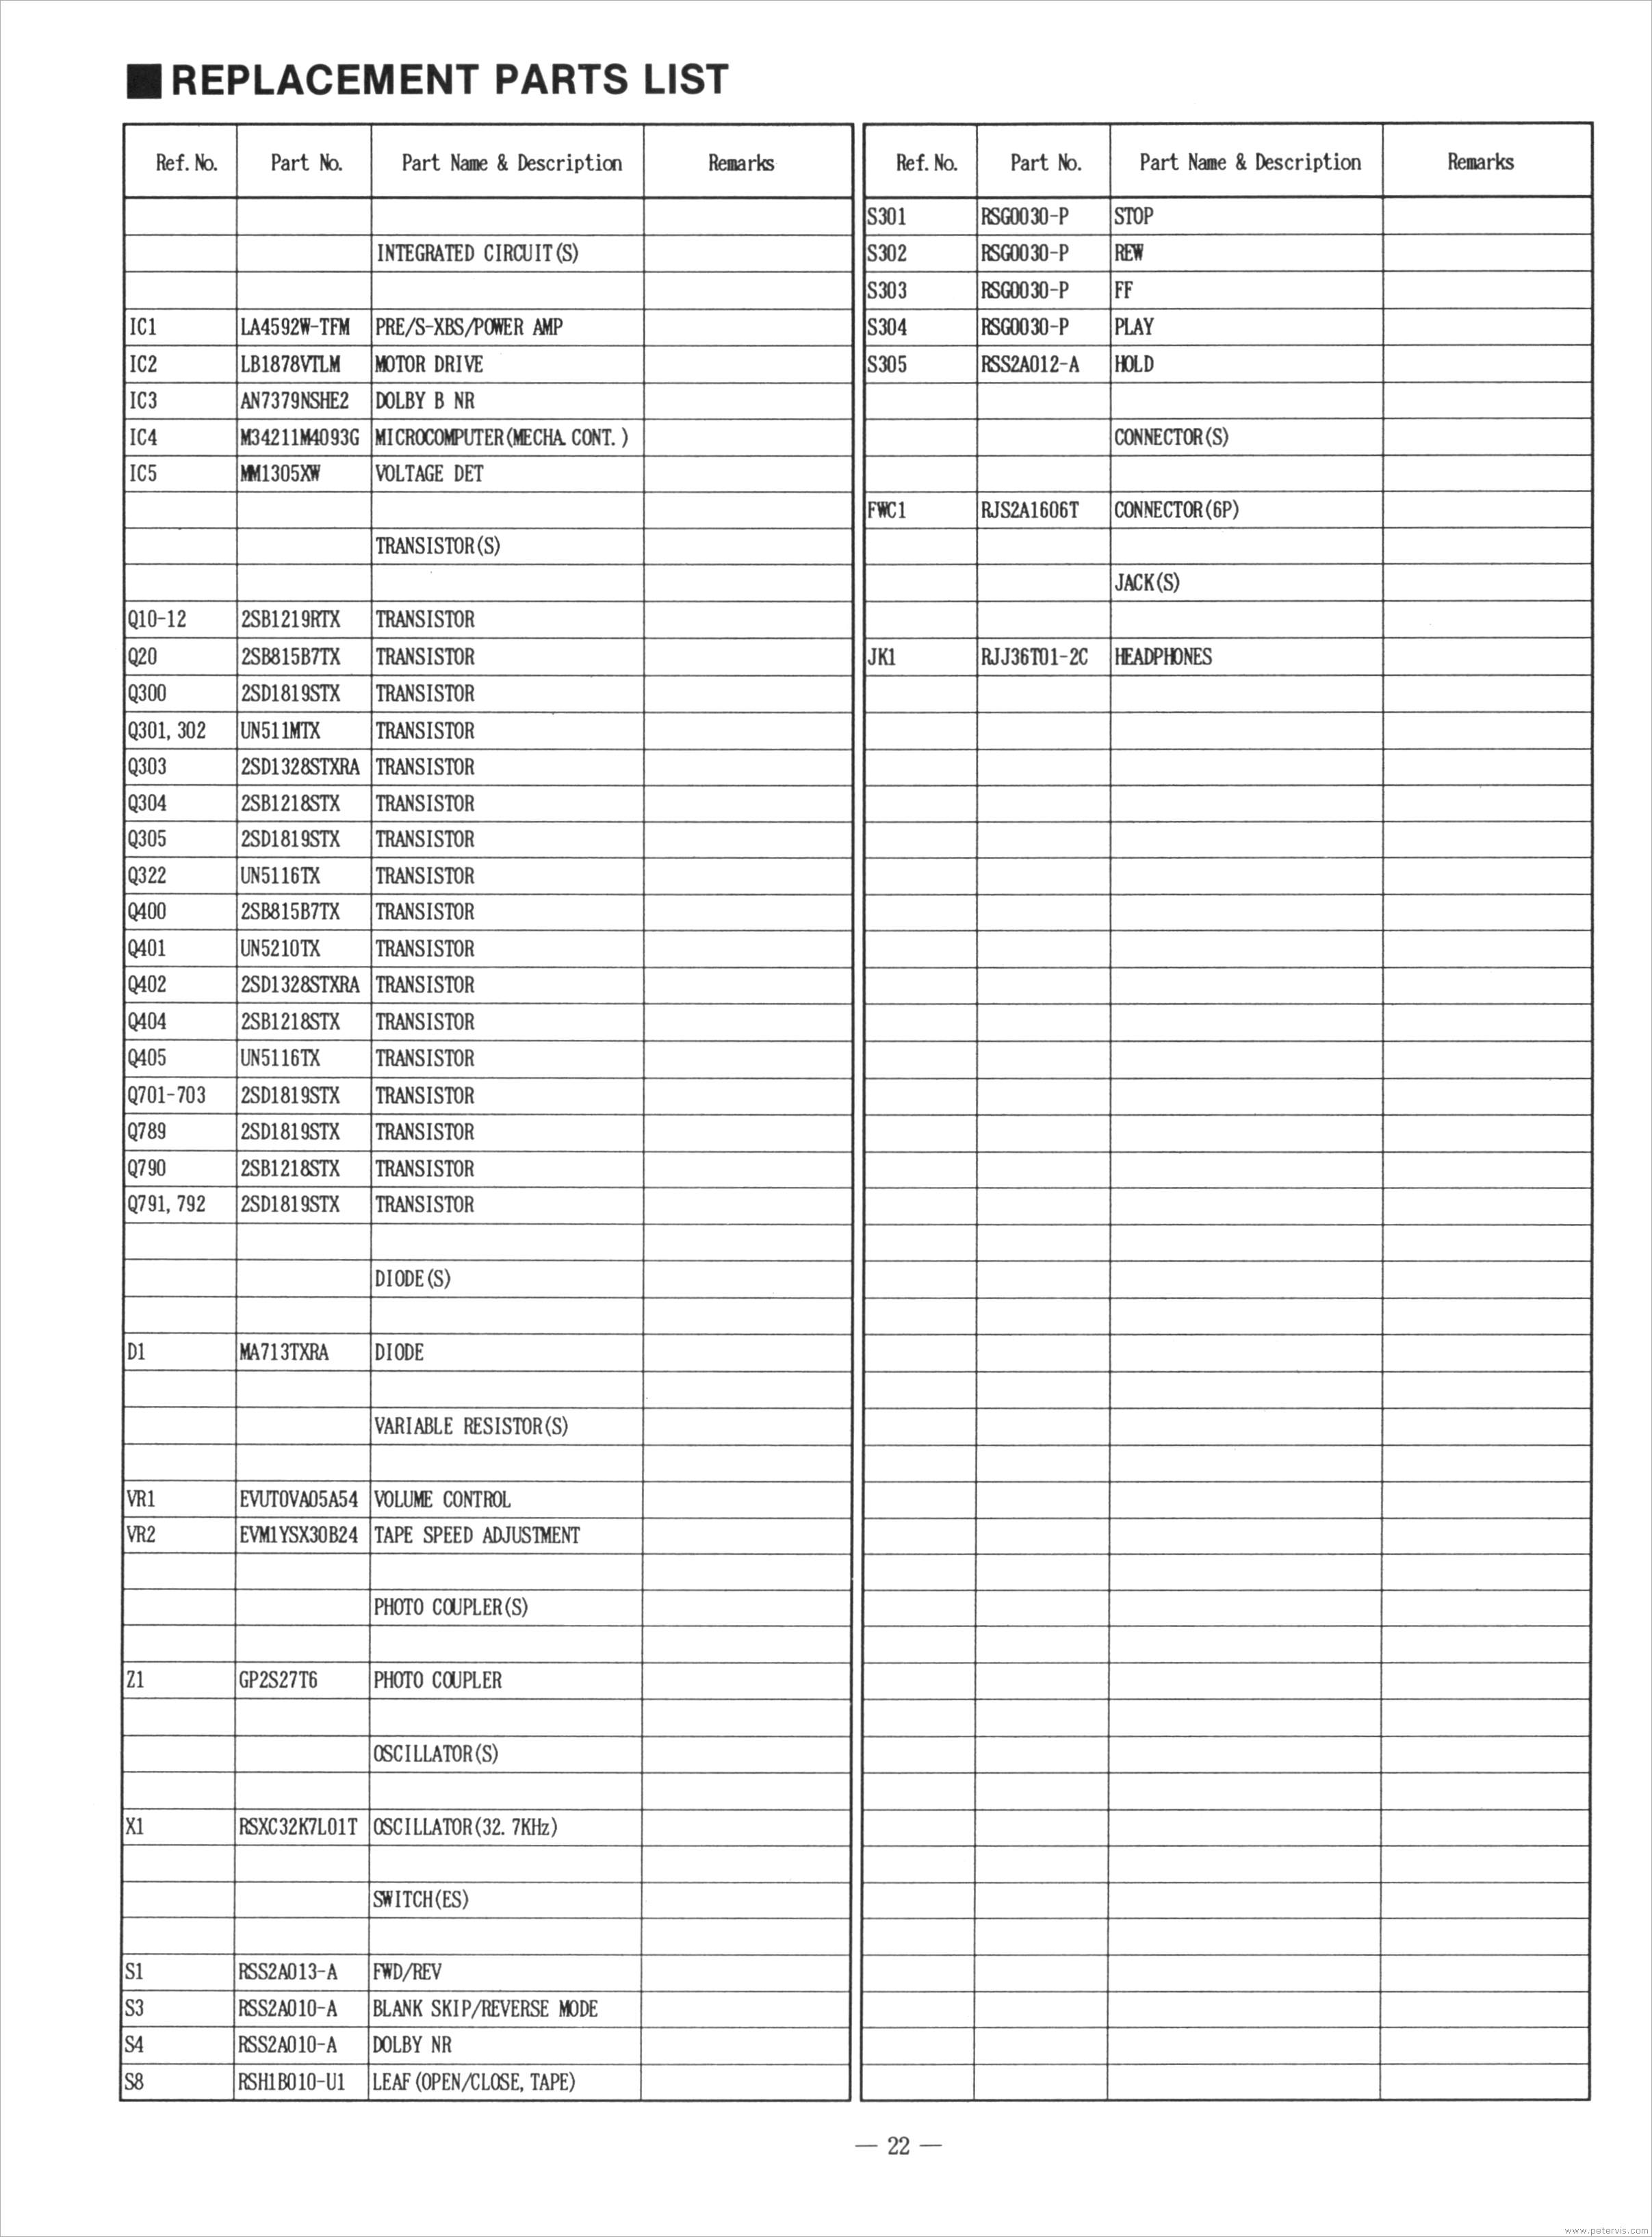 022 REPLACEMENT PARTS LIST